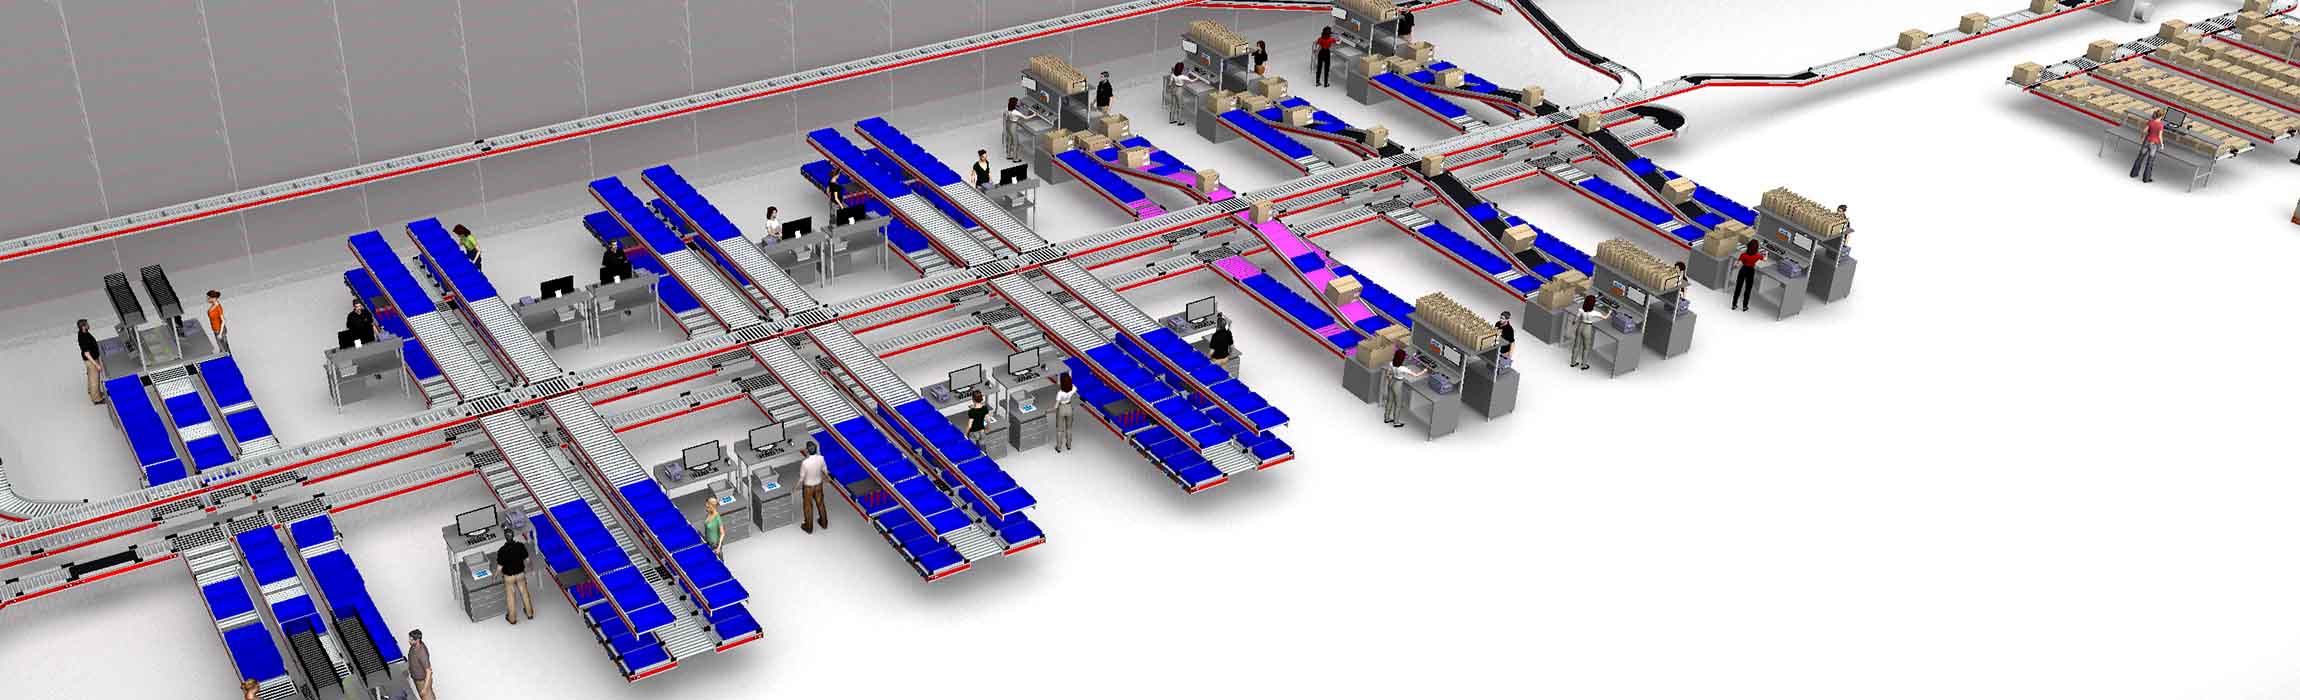 Highly automated intralogistics including complete SAP EWM implementation for the Heinrich Kipp Werk.